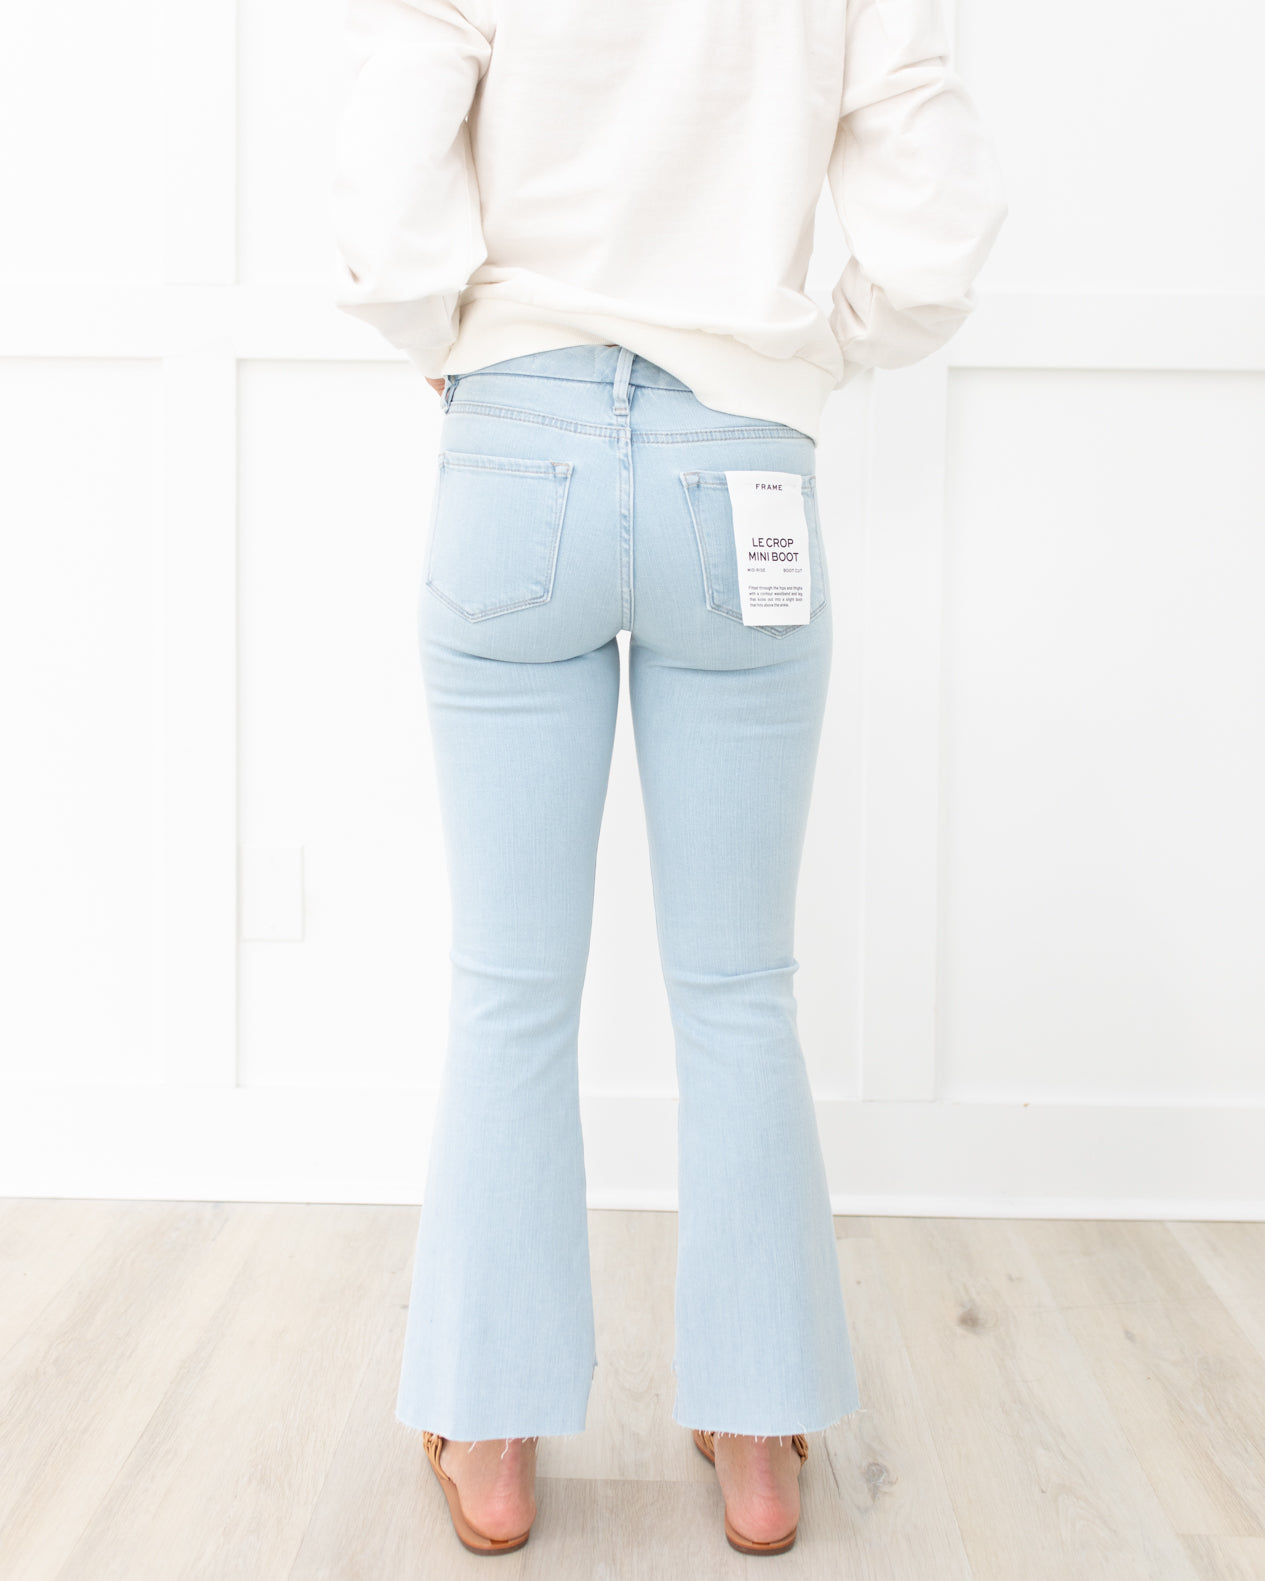 Le Crop Mini Boot High-Rise Boot-Cut Jeans in Light Wash